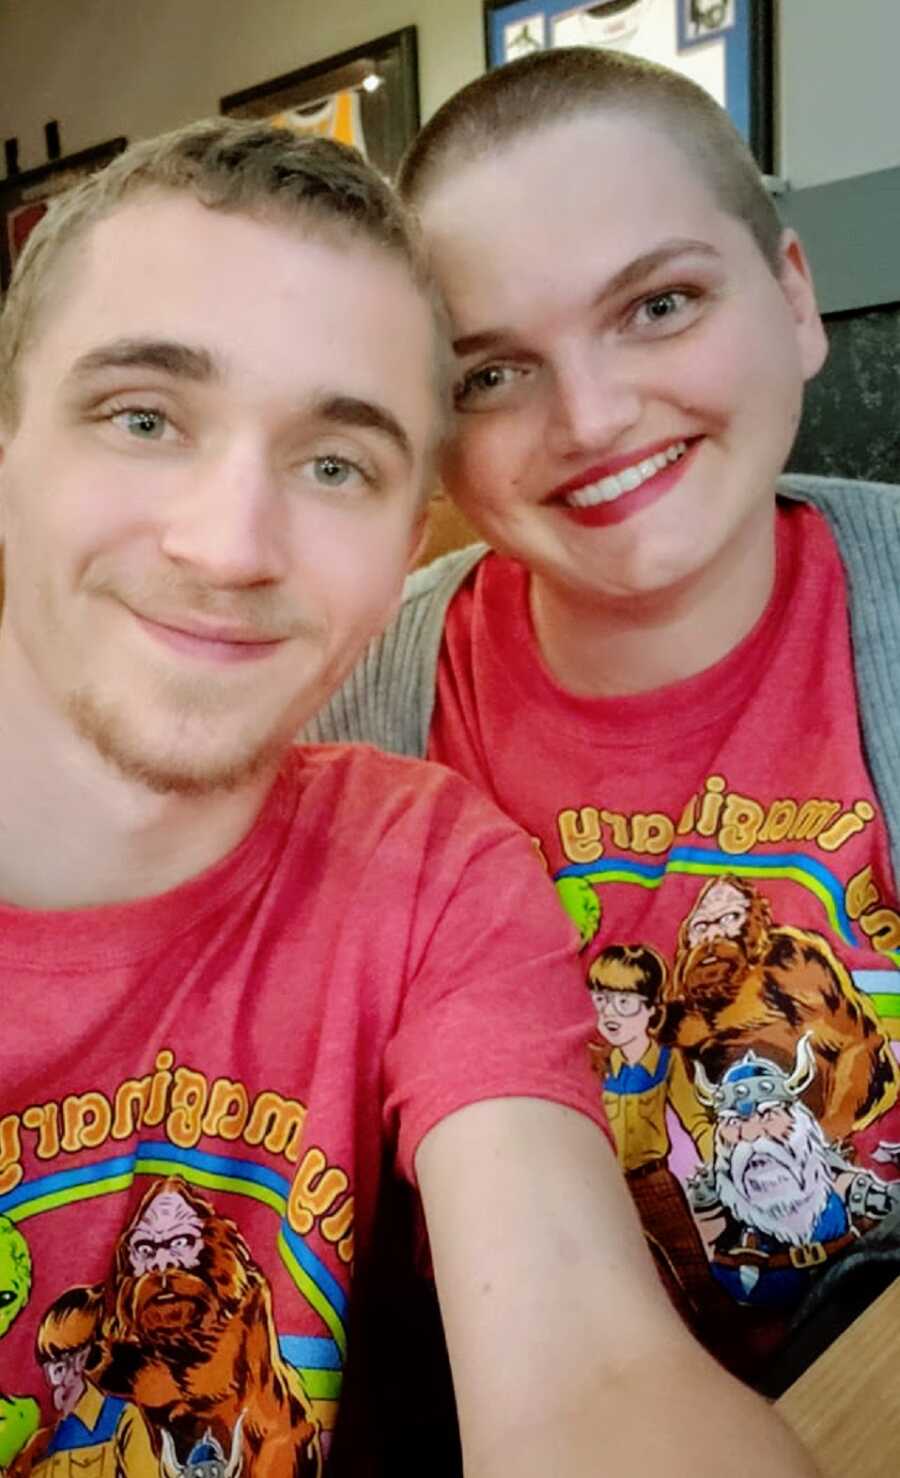 A woman and her partner wearing matching red shirts